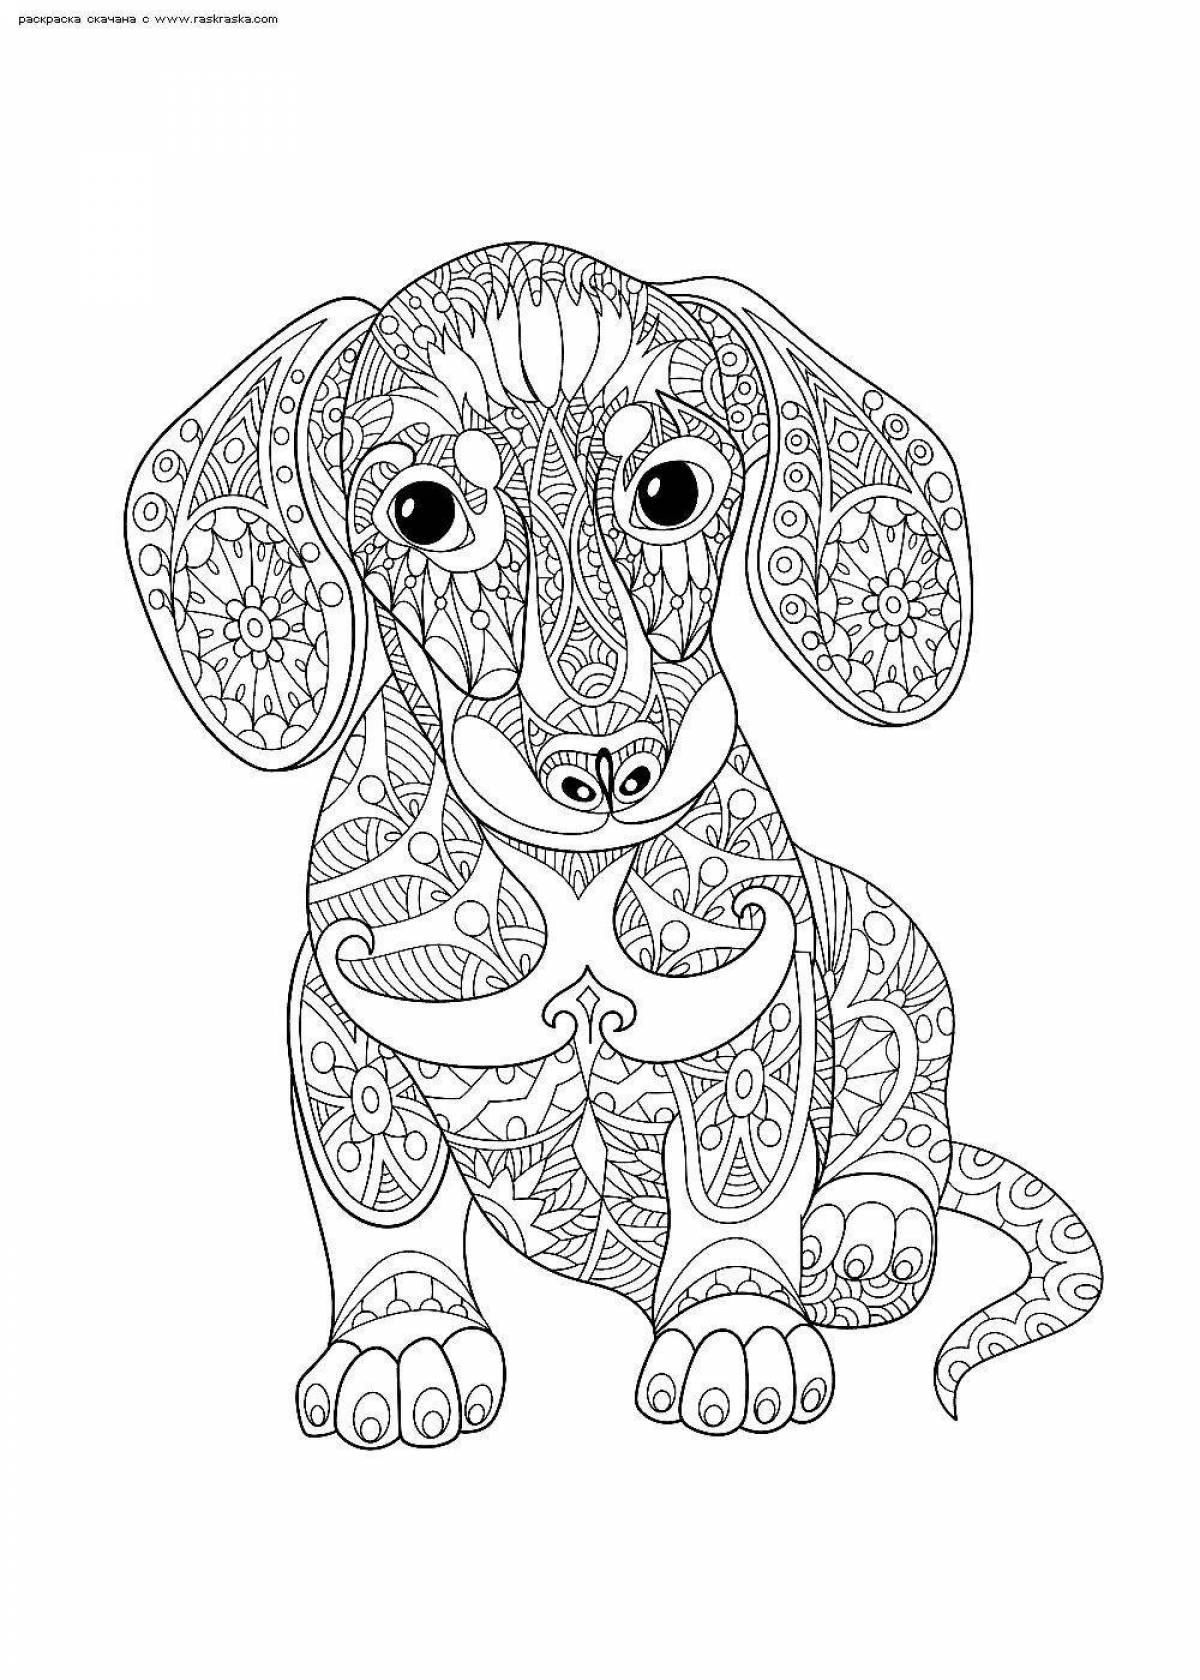 Fabulous animals coloring for adults